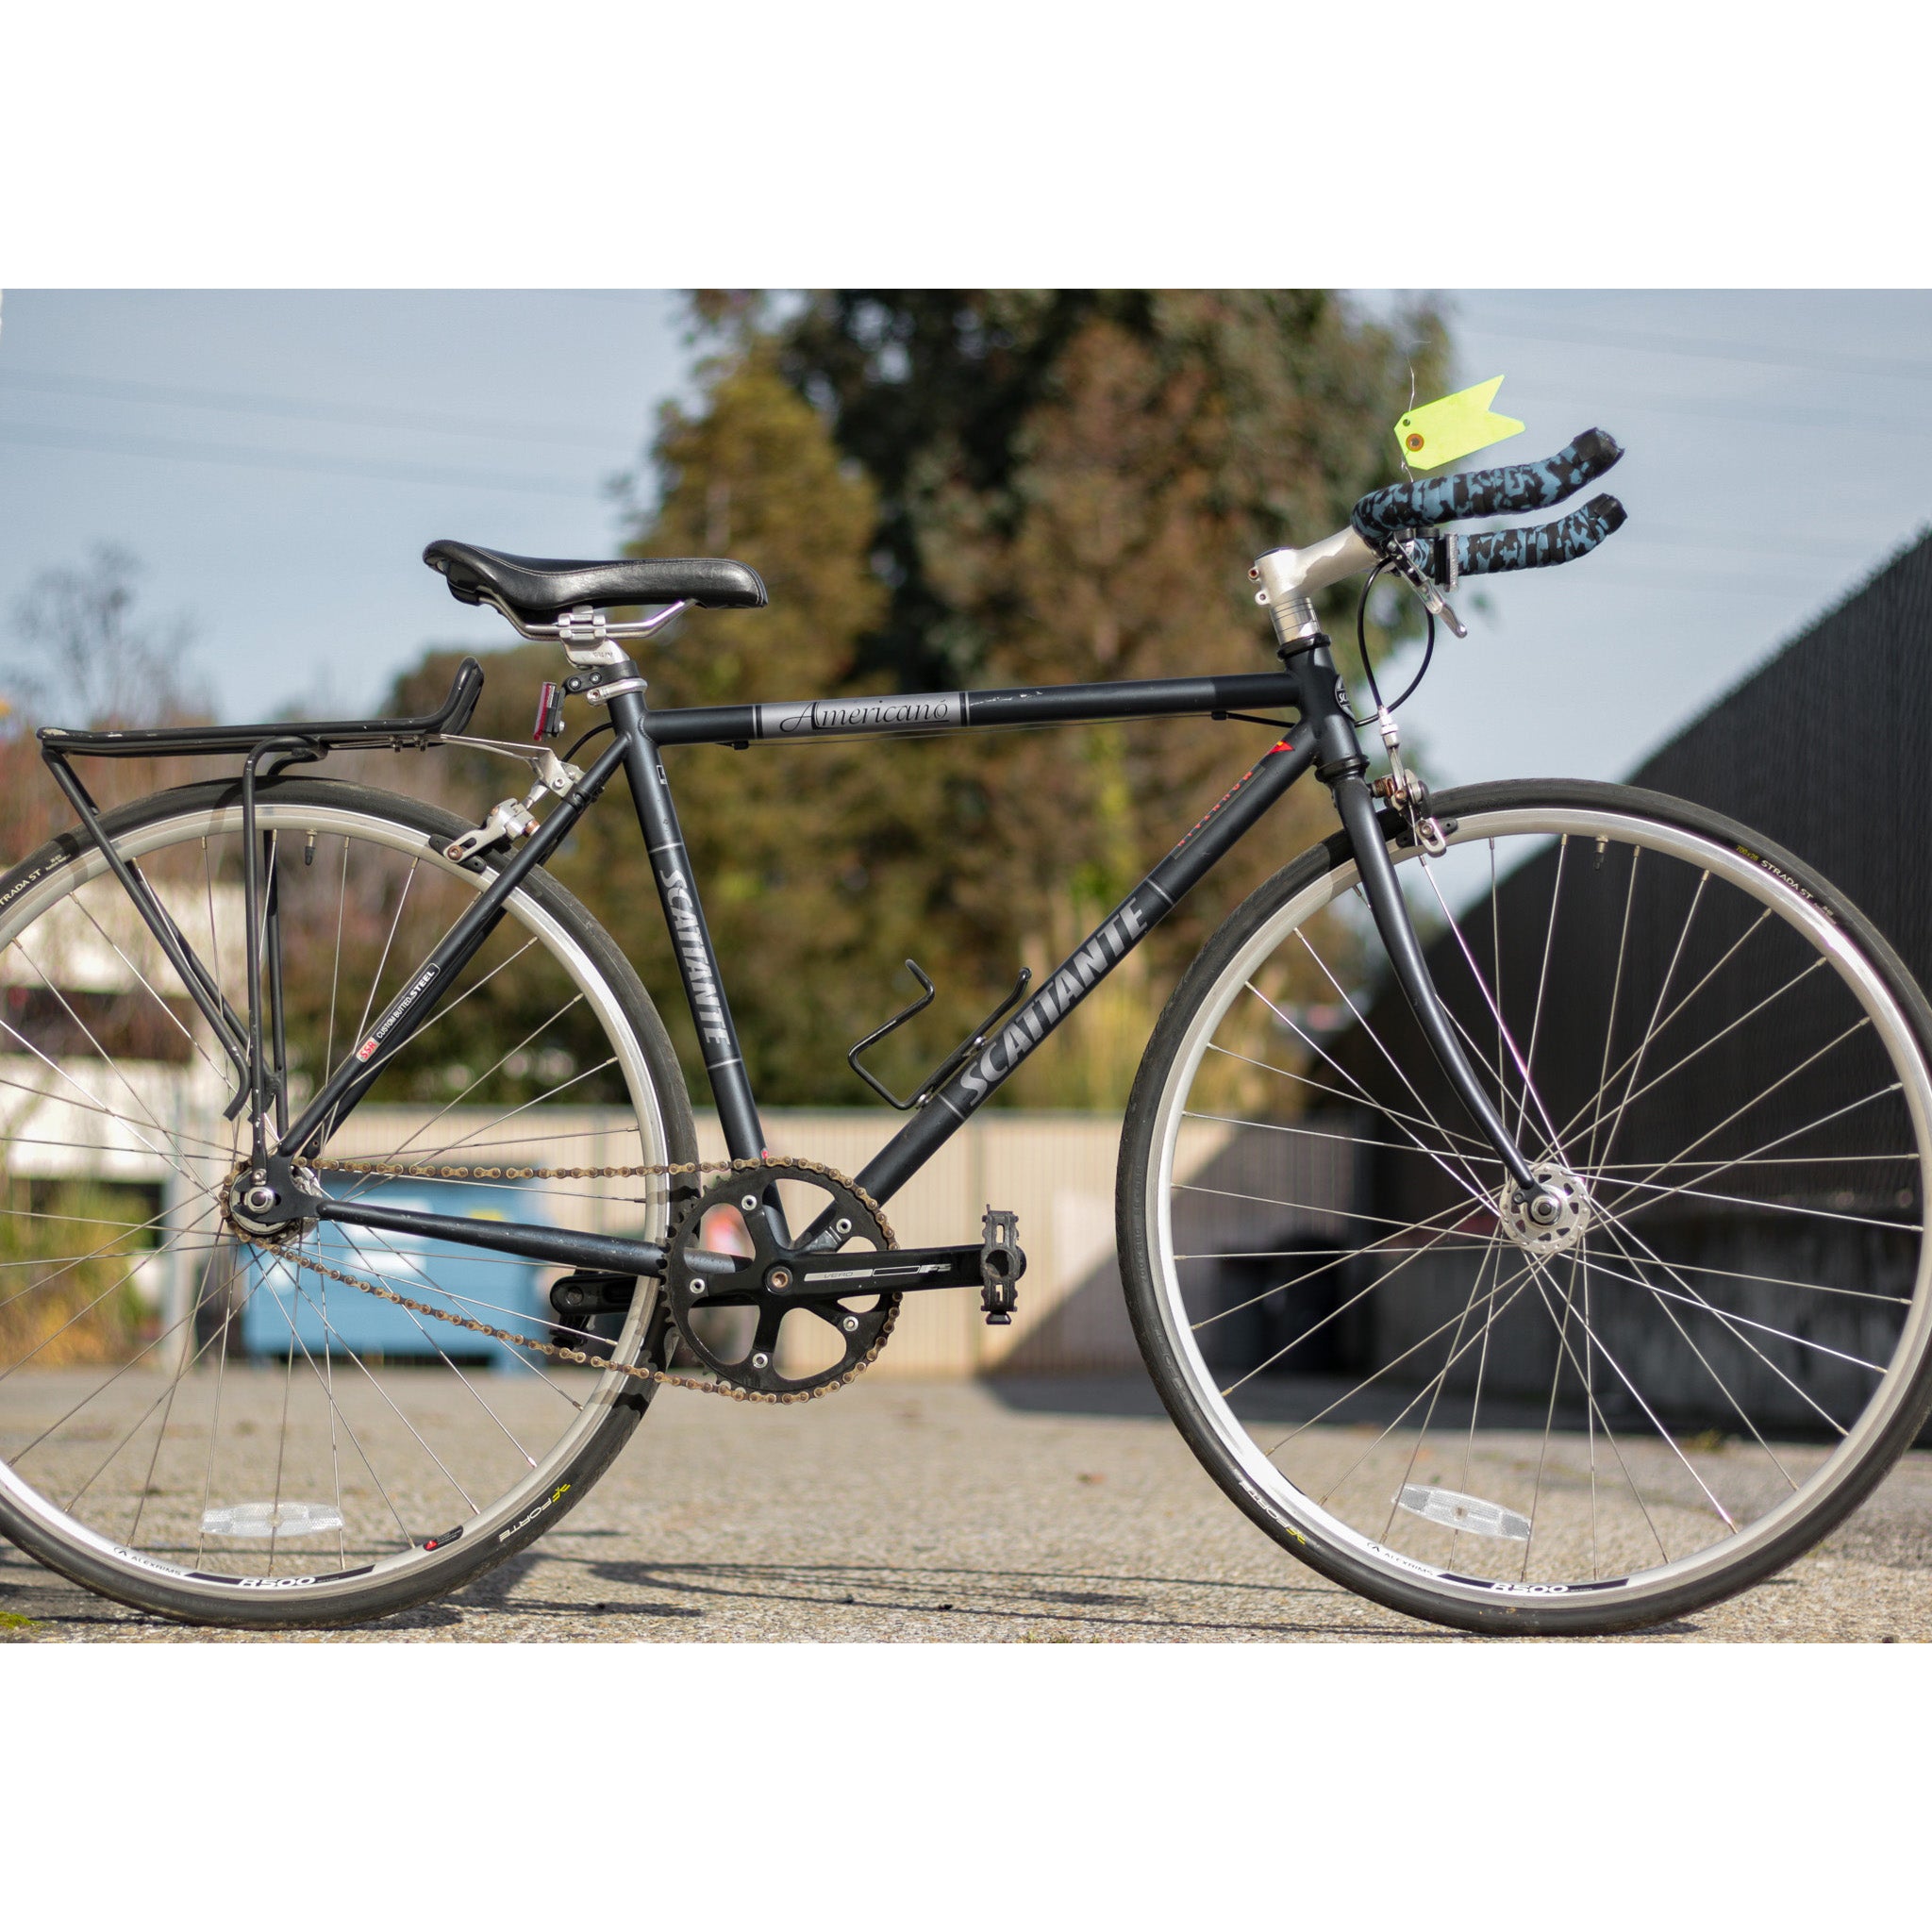 Scattante Americano Singlespeed Road Bike, Small Used Bikes for Sale - Silicon Valley Bicycle Exchange